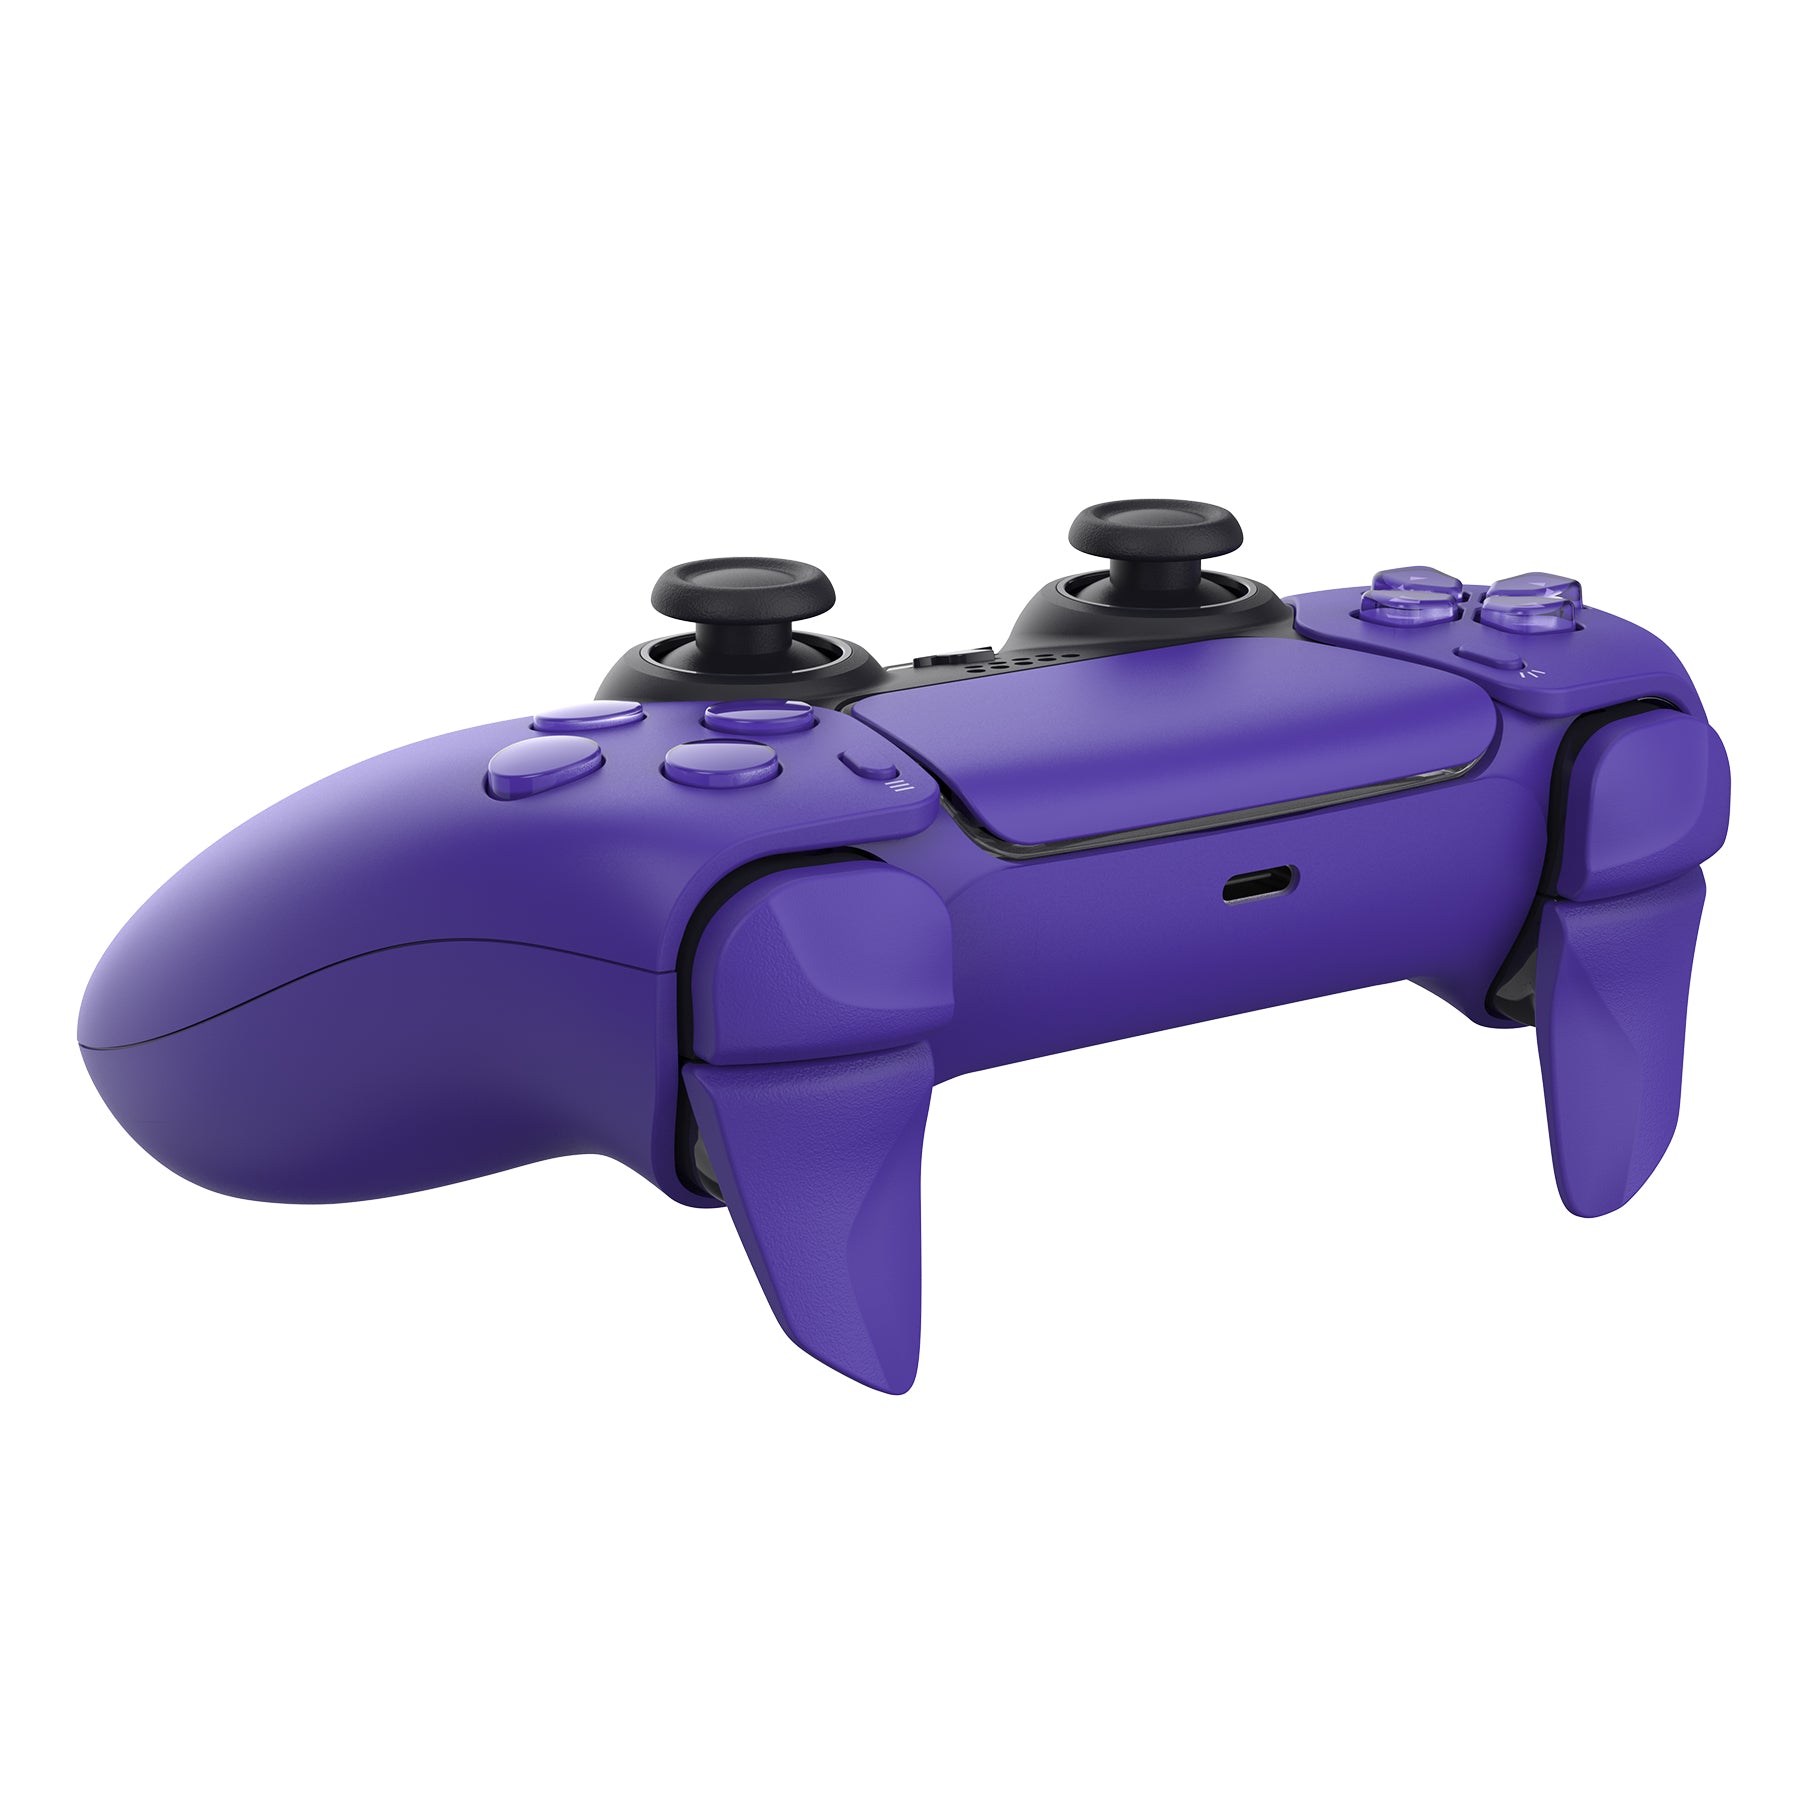 PlayVital Galactic Purple 2 Pair Shoulder Buttons Extension Triggers for PS5 Controller, Game Improvement Adjusters for PS5 Controller, Bumper Trigger Extenders for PS5 Controller - PFPJ090 PlayVital